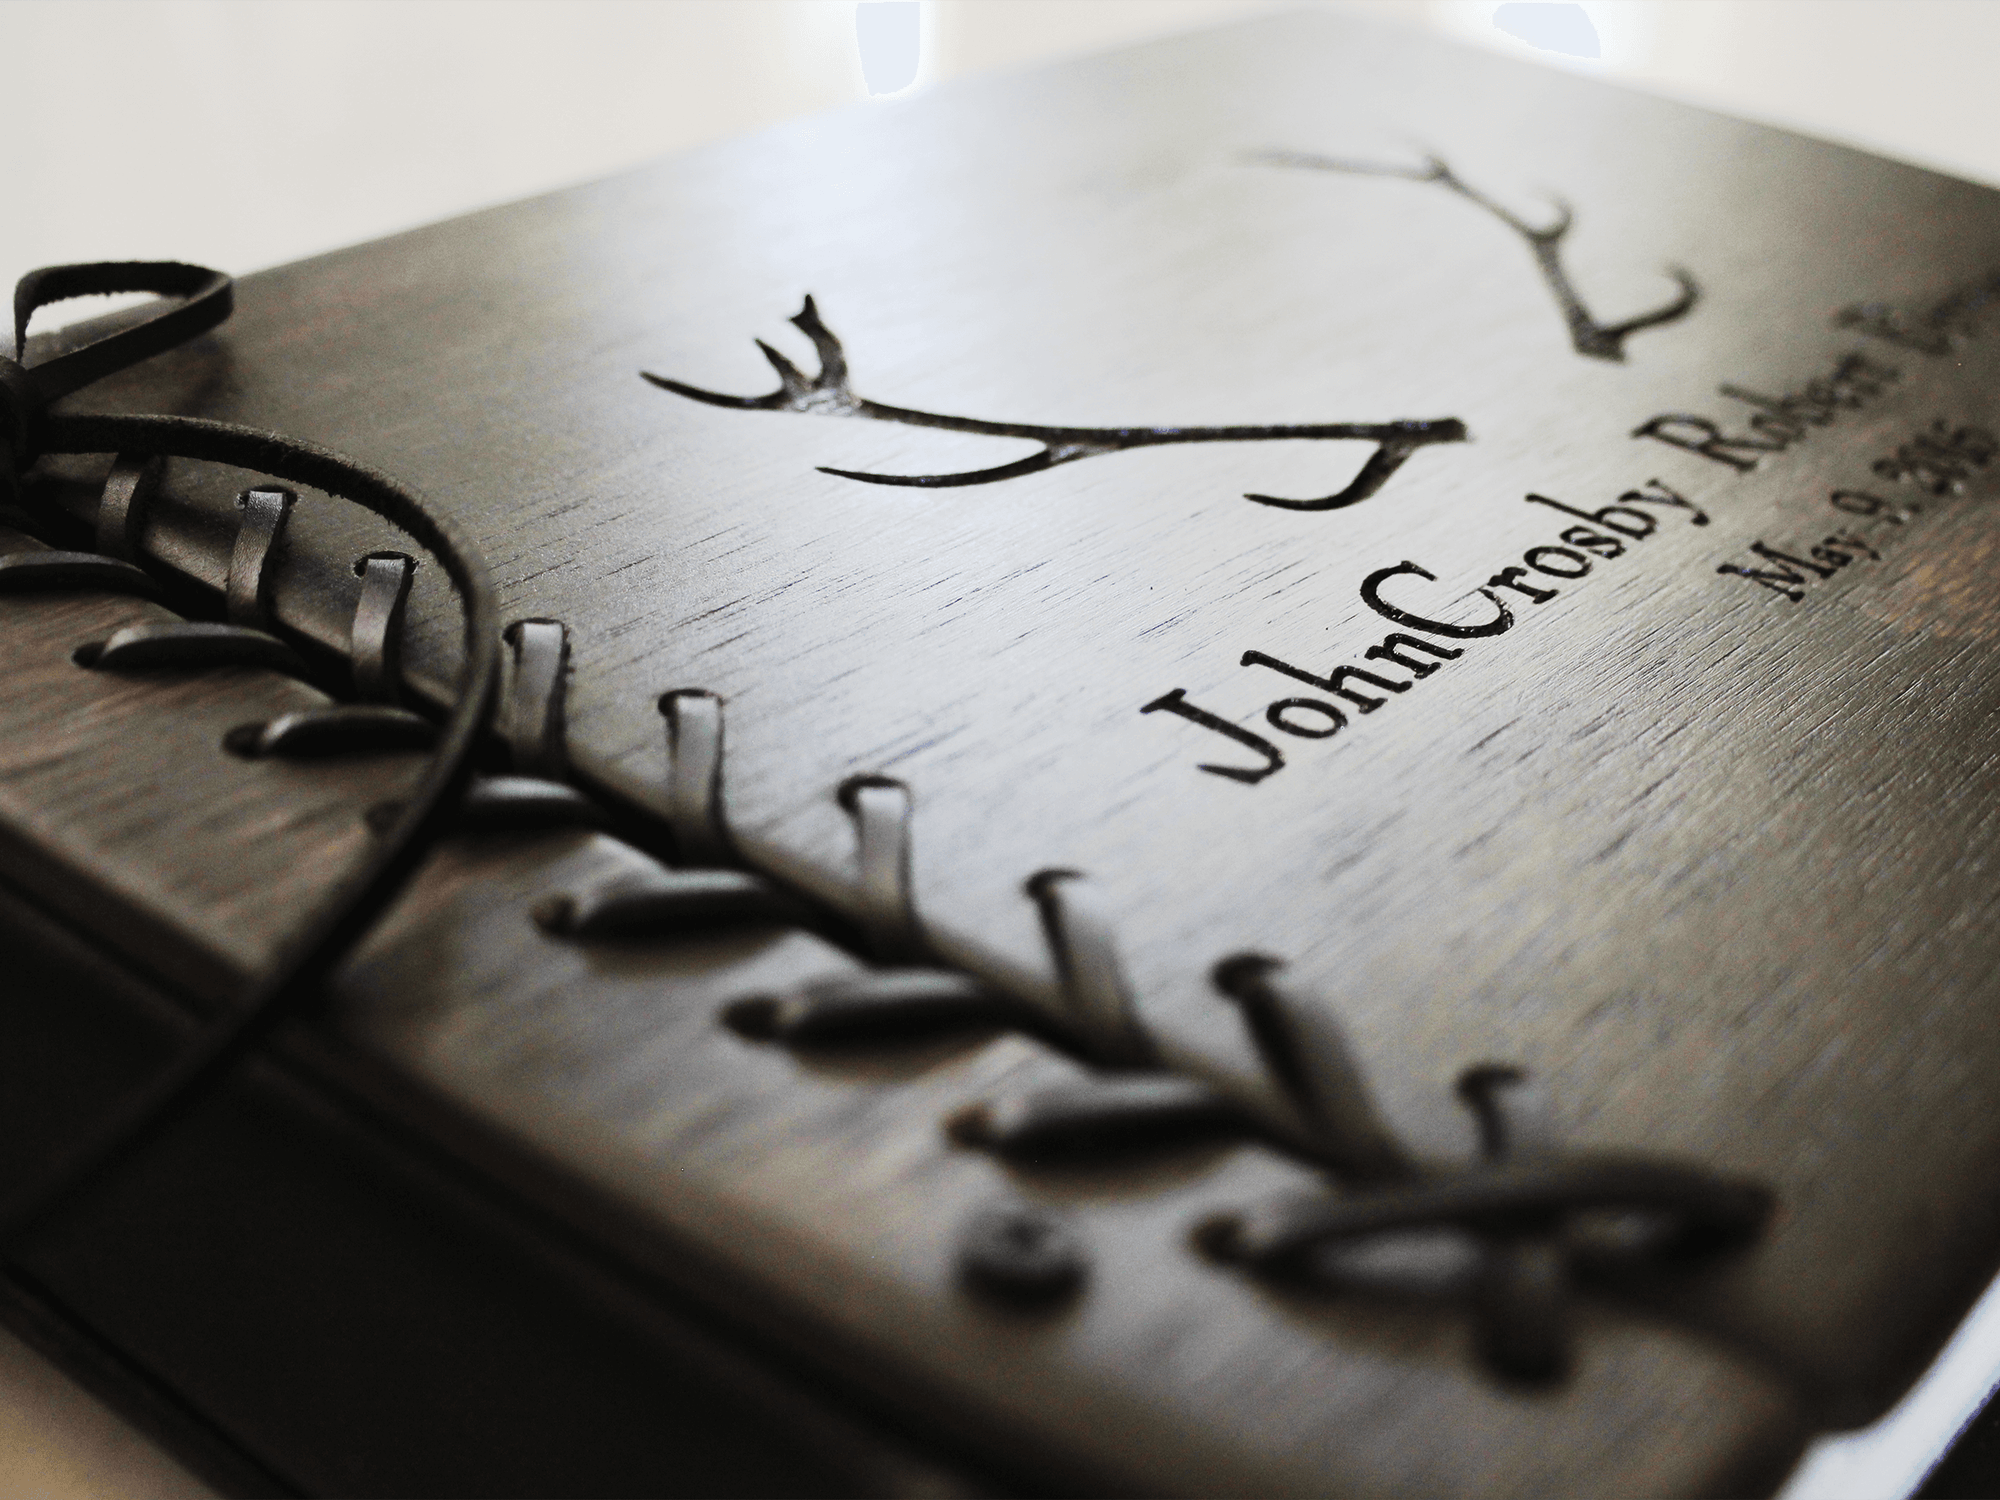 Forever in Our Hearts Memory Book | Keep the memory of your loved one alive with this touching and personalized memory book by Rustic Engravings - a cherished tribute to their life.